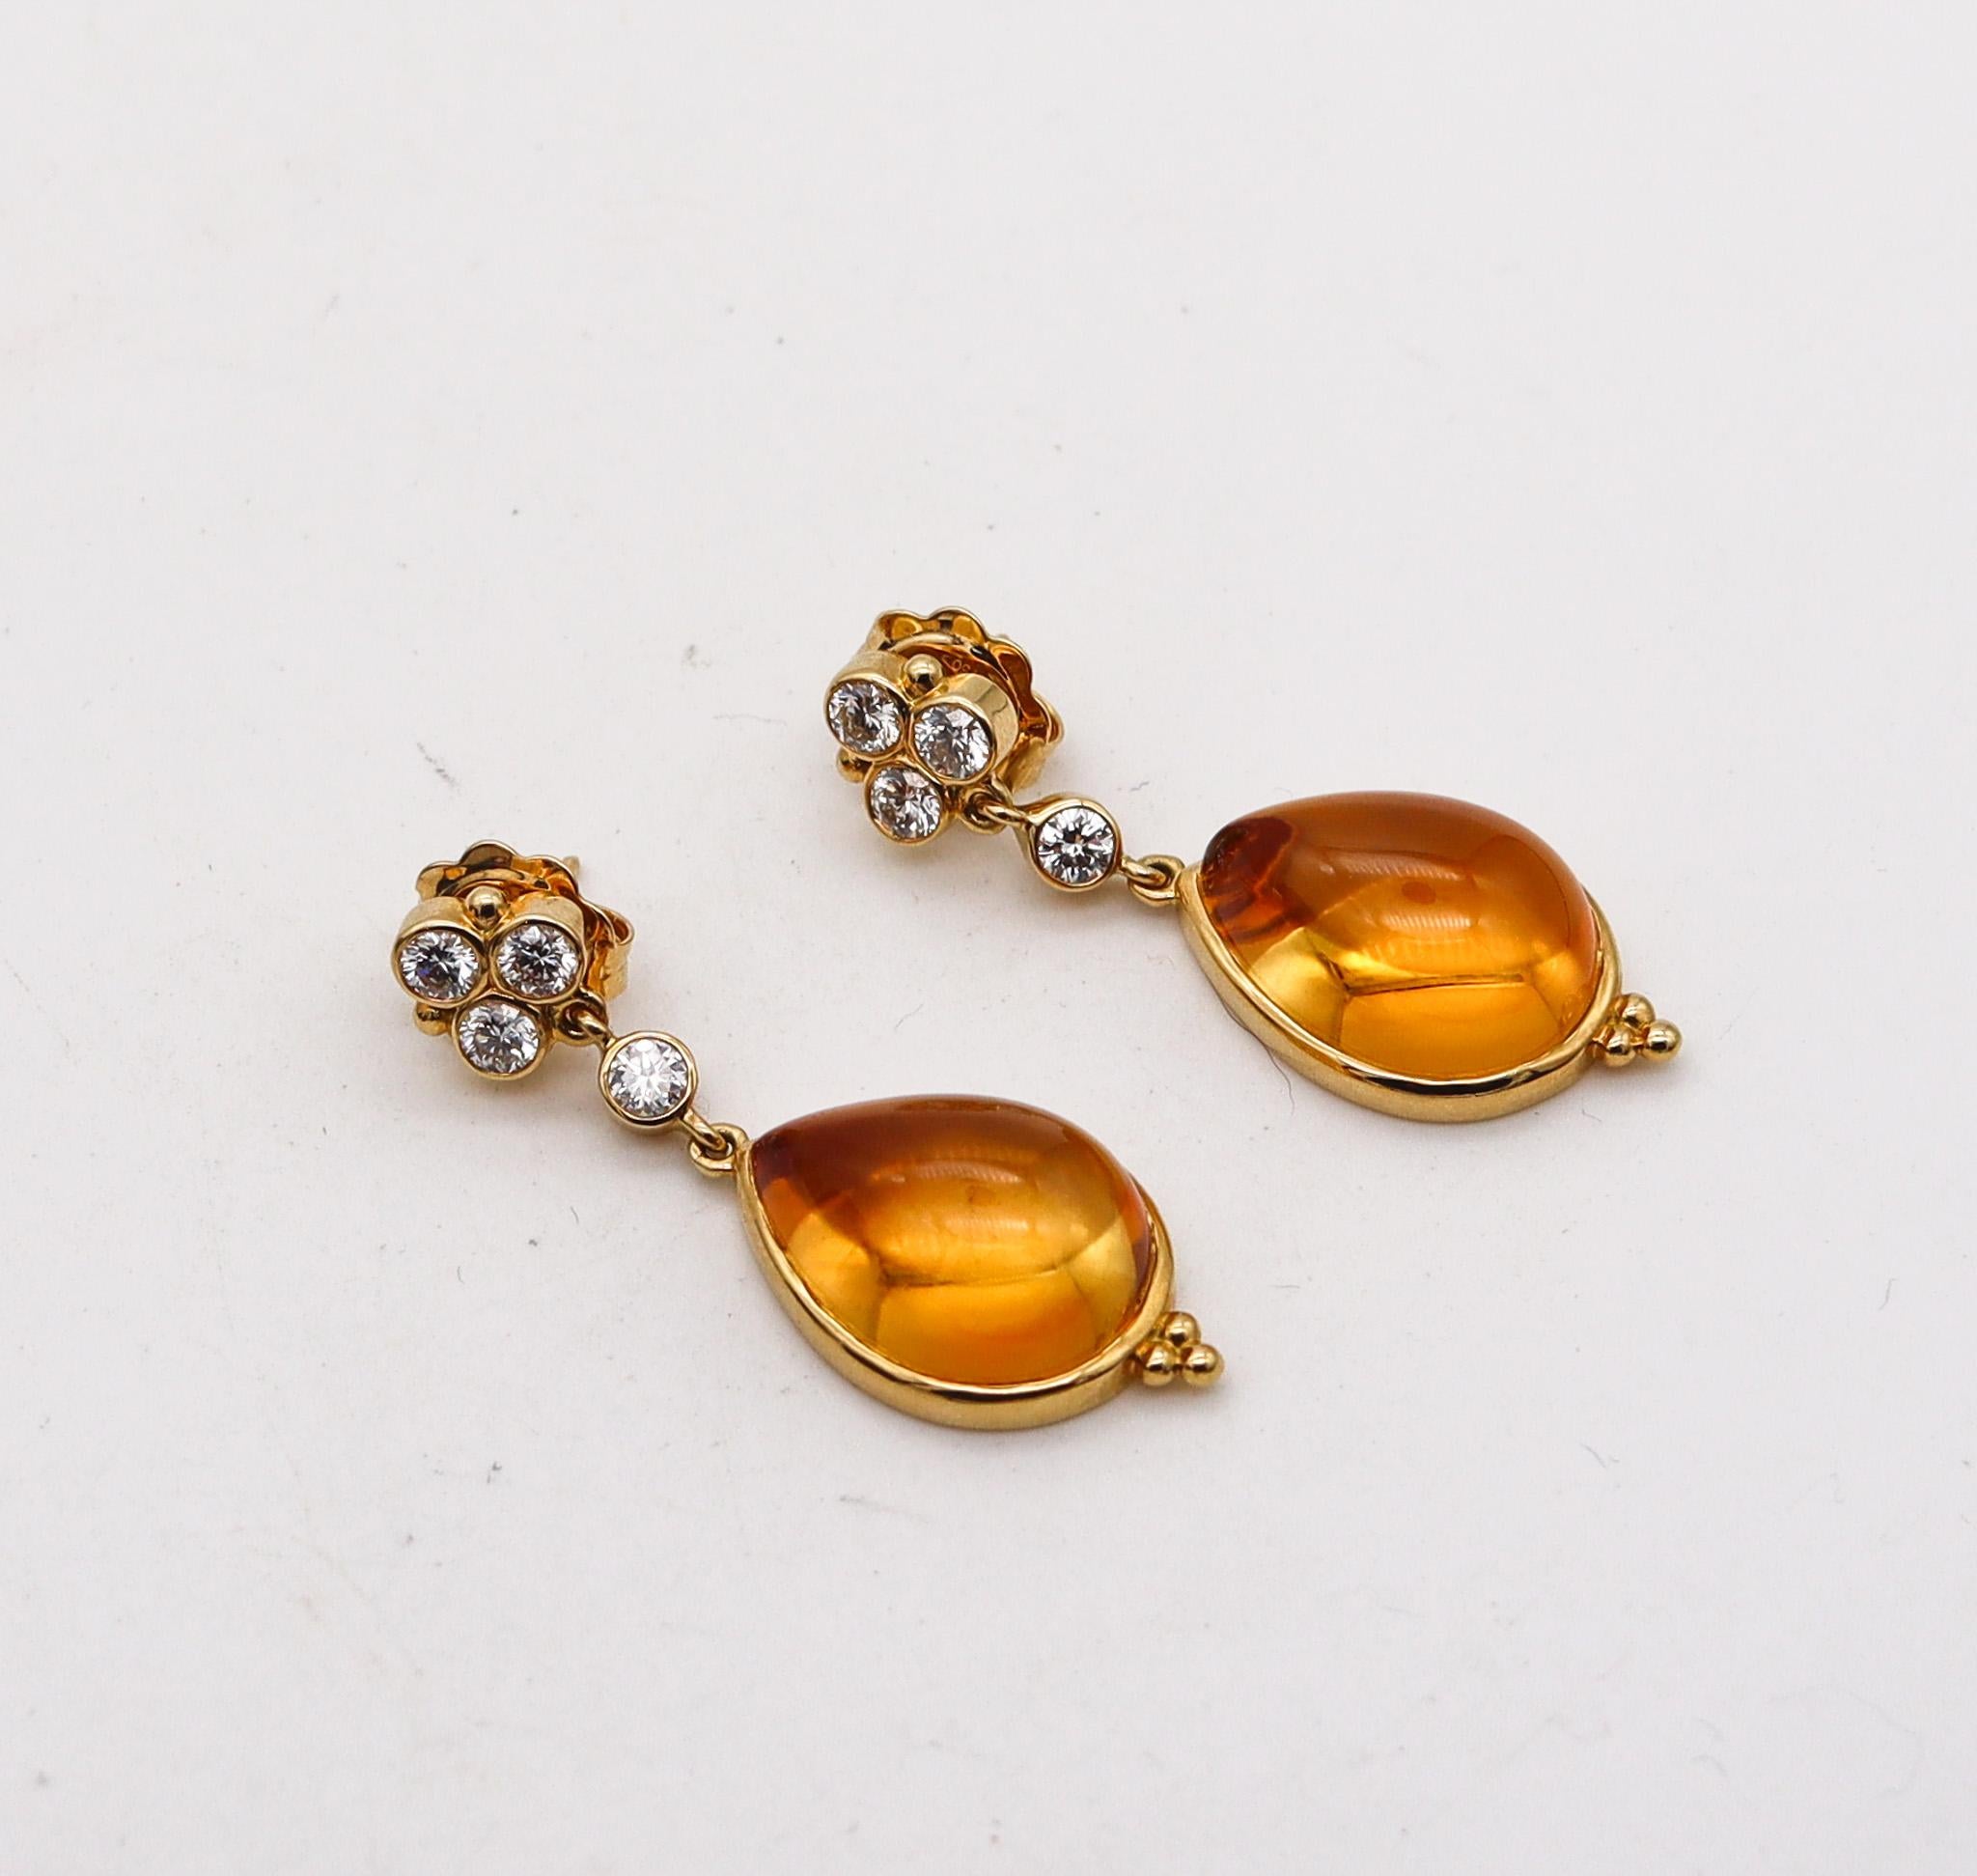 Modernist Temple St Clair Dangle Earrings In 18Kt Gold With 27.98 Ctw In Diamonds And Gems